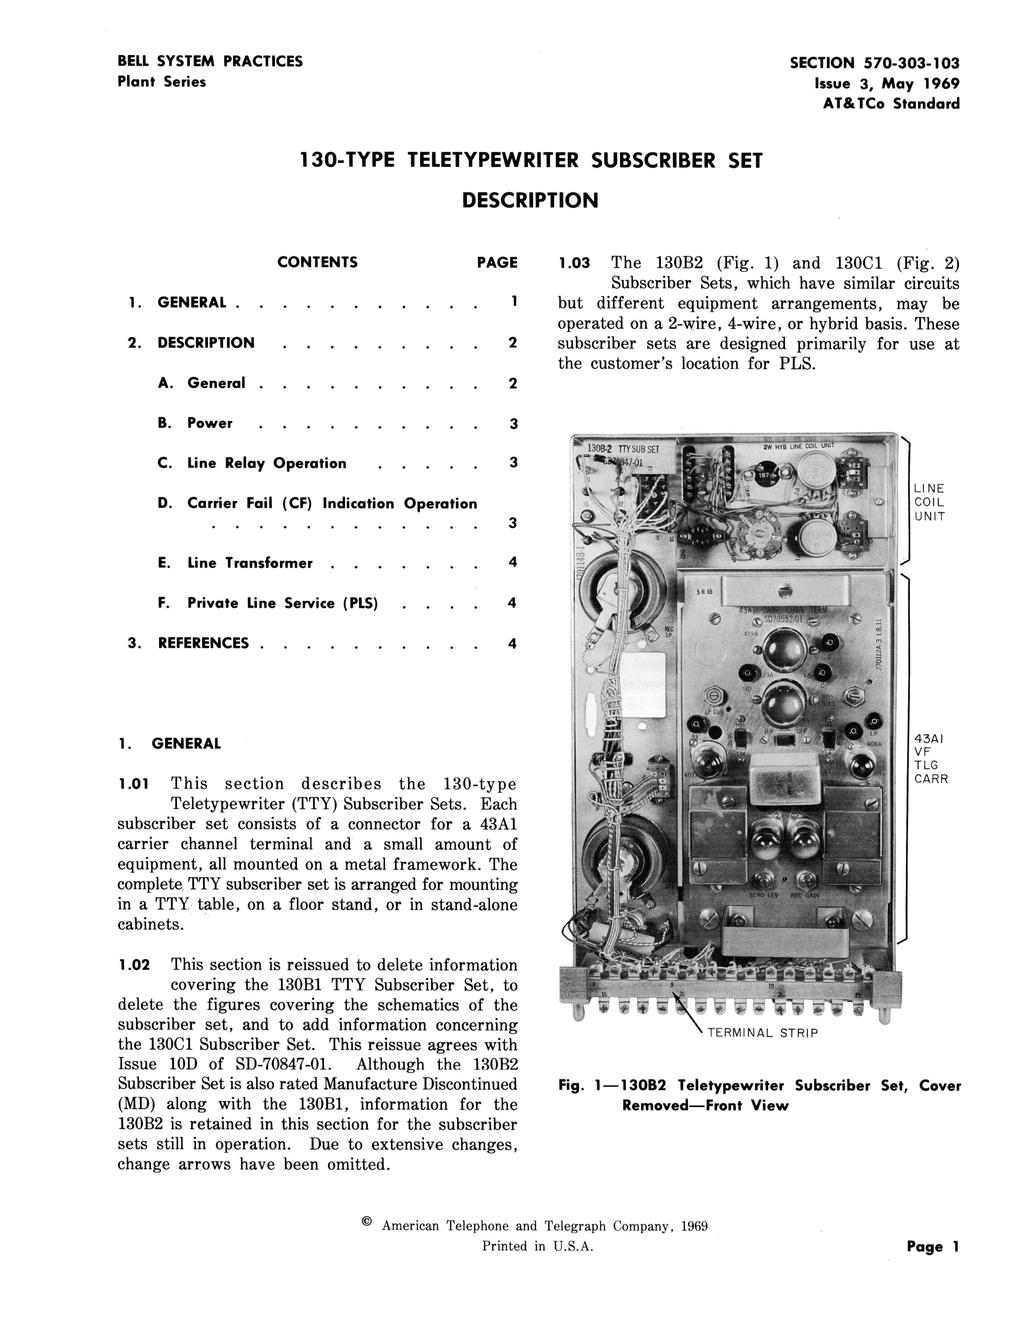 BELL SYSTEM PRACTICES Plant Series SECTION 570-303-103 Issue 3, May 1969 AT & TCo Standard 130-TYPE TELETYPEWRITER SUBSCRIBER SET DESCRIPTION CONTENTS PAGE 1. GENERAL. 2. DESCRIPTION 2 A. General 2 1.